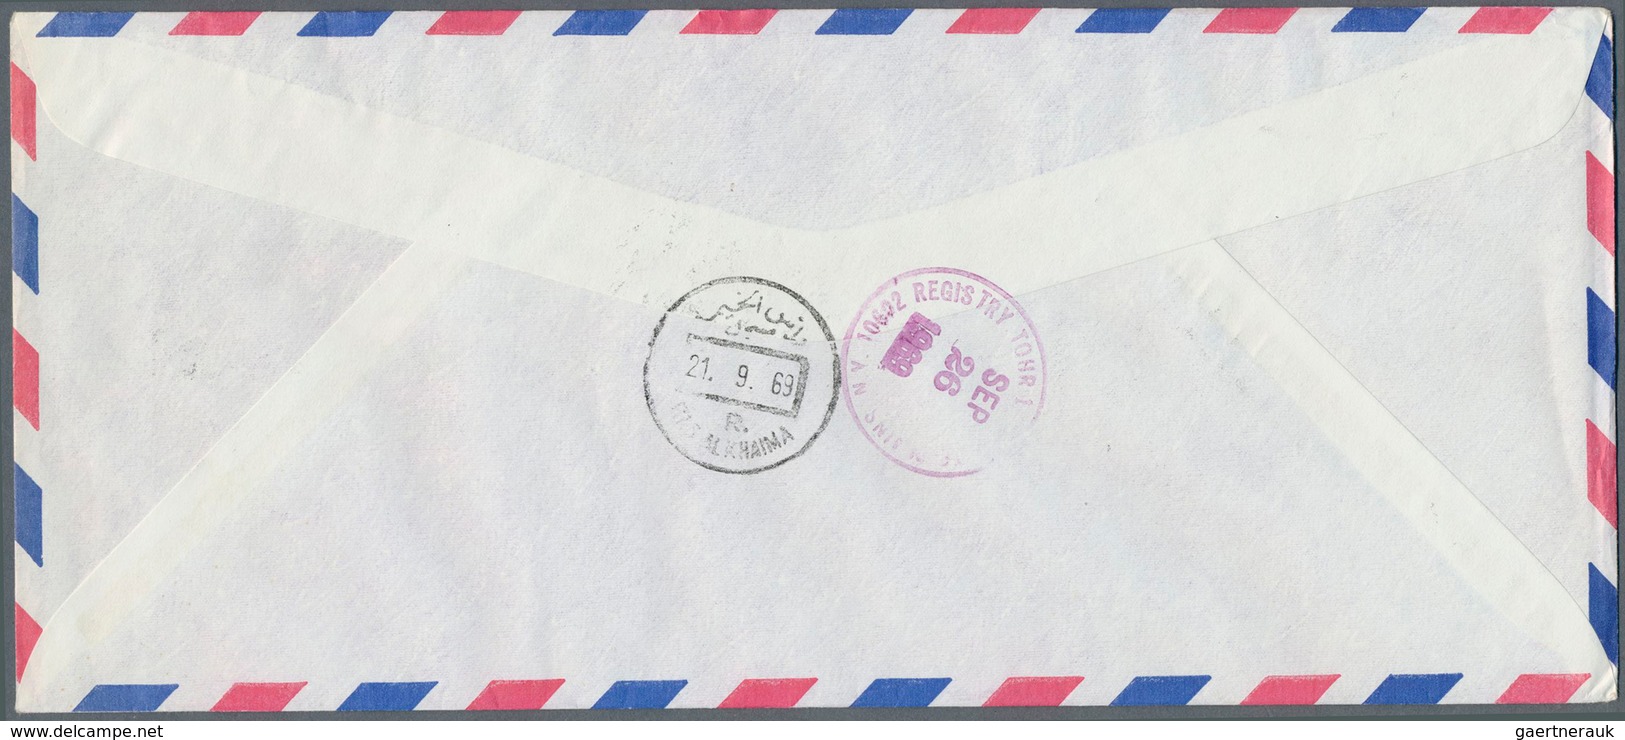 09651 Ras al Khaima: 1969, Space Research, four registered airmail covers to USA/Germany with arrival mark